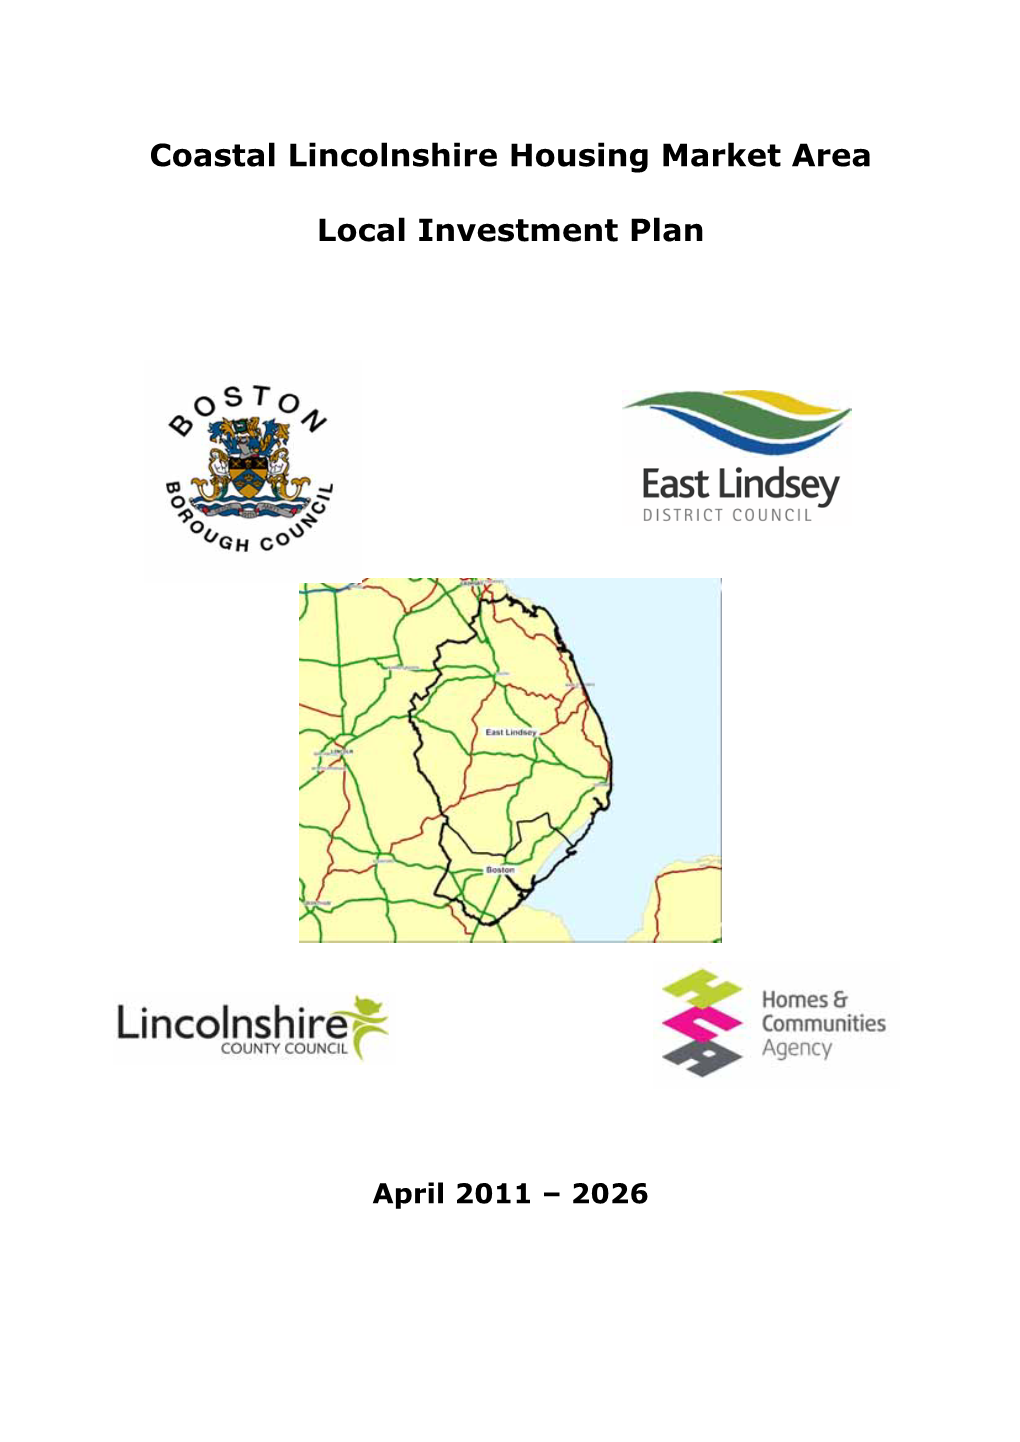 Coastal Lincolnshire Housing Market Area Local Investment Plan